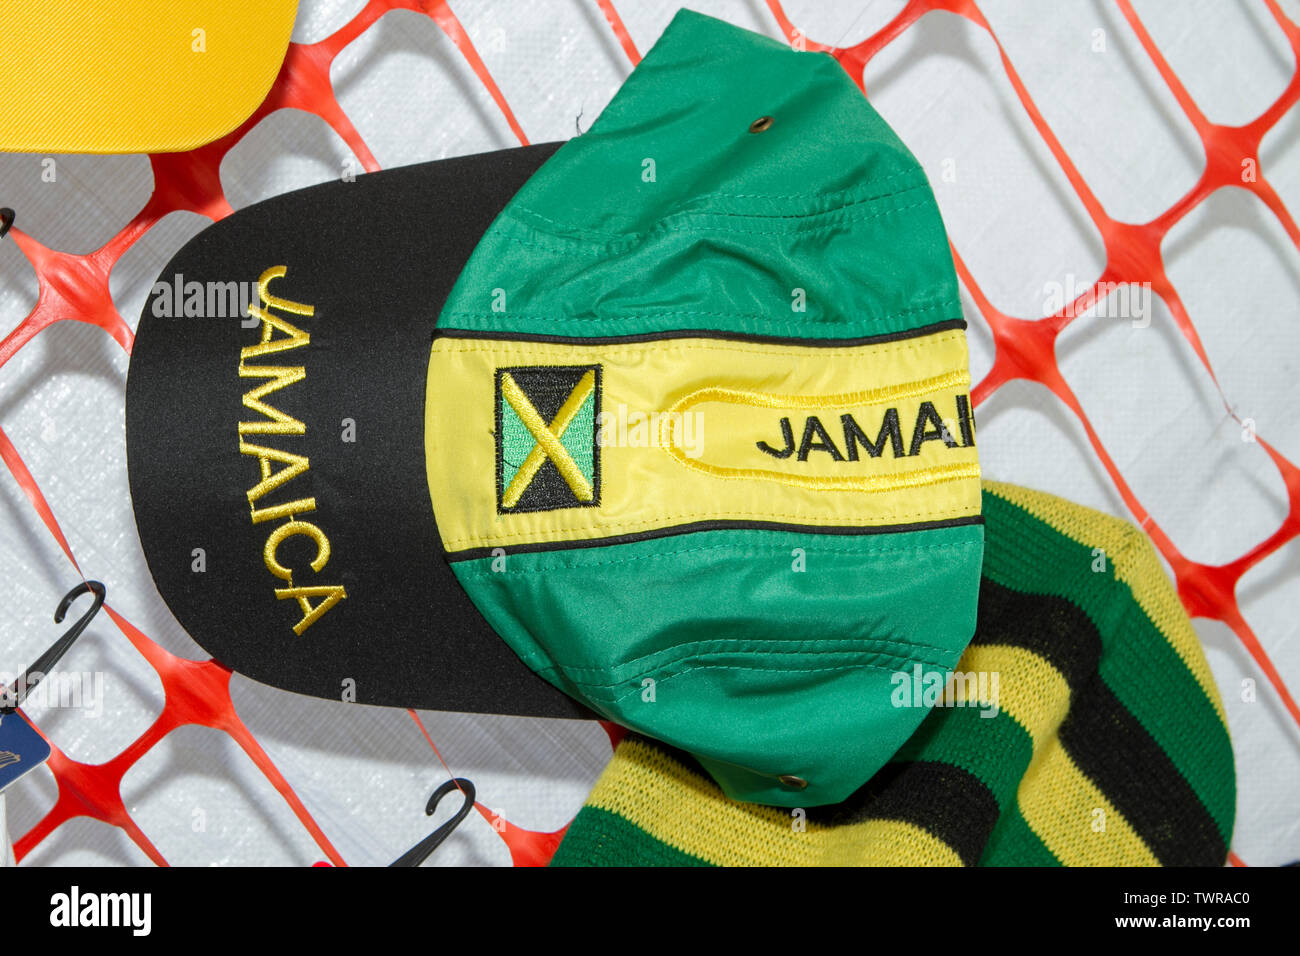 Jamaica Jamaican merchandise for sale on stall at the Africa Oye music festival in Liverpool, Merseyside, UK Stock Photo